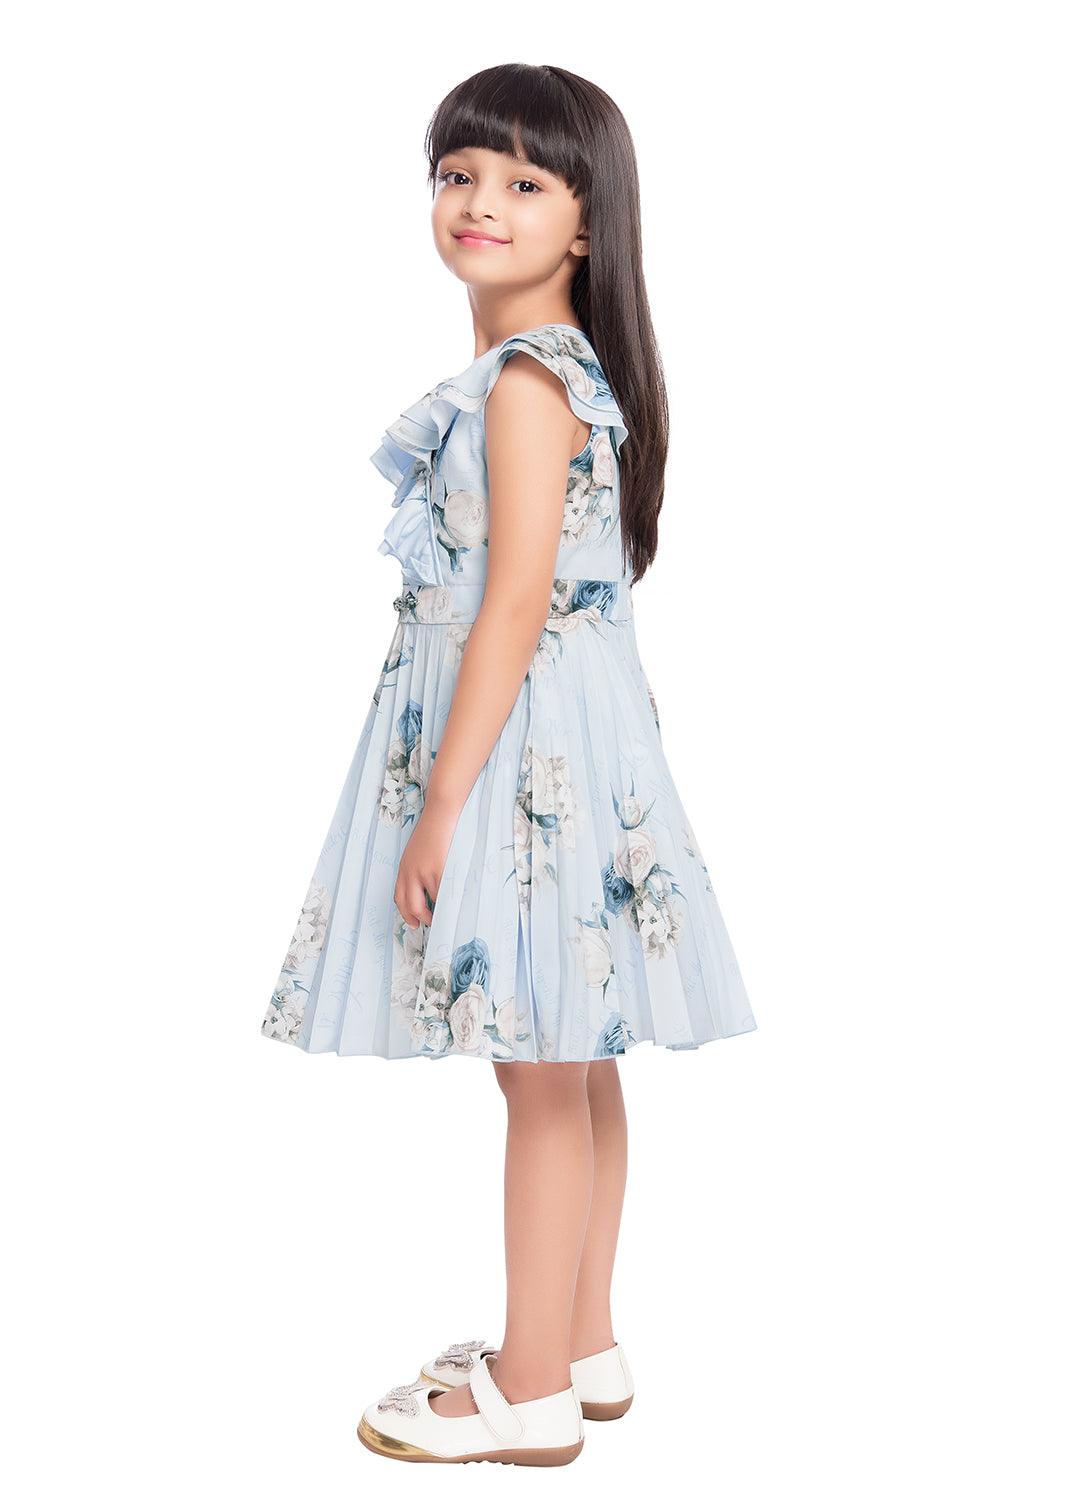 Floral Sky Blue Knee Length Dress - 2000-Sky Blue - TINY BABY INDIA shop.tinybaby.in